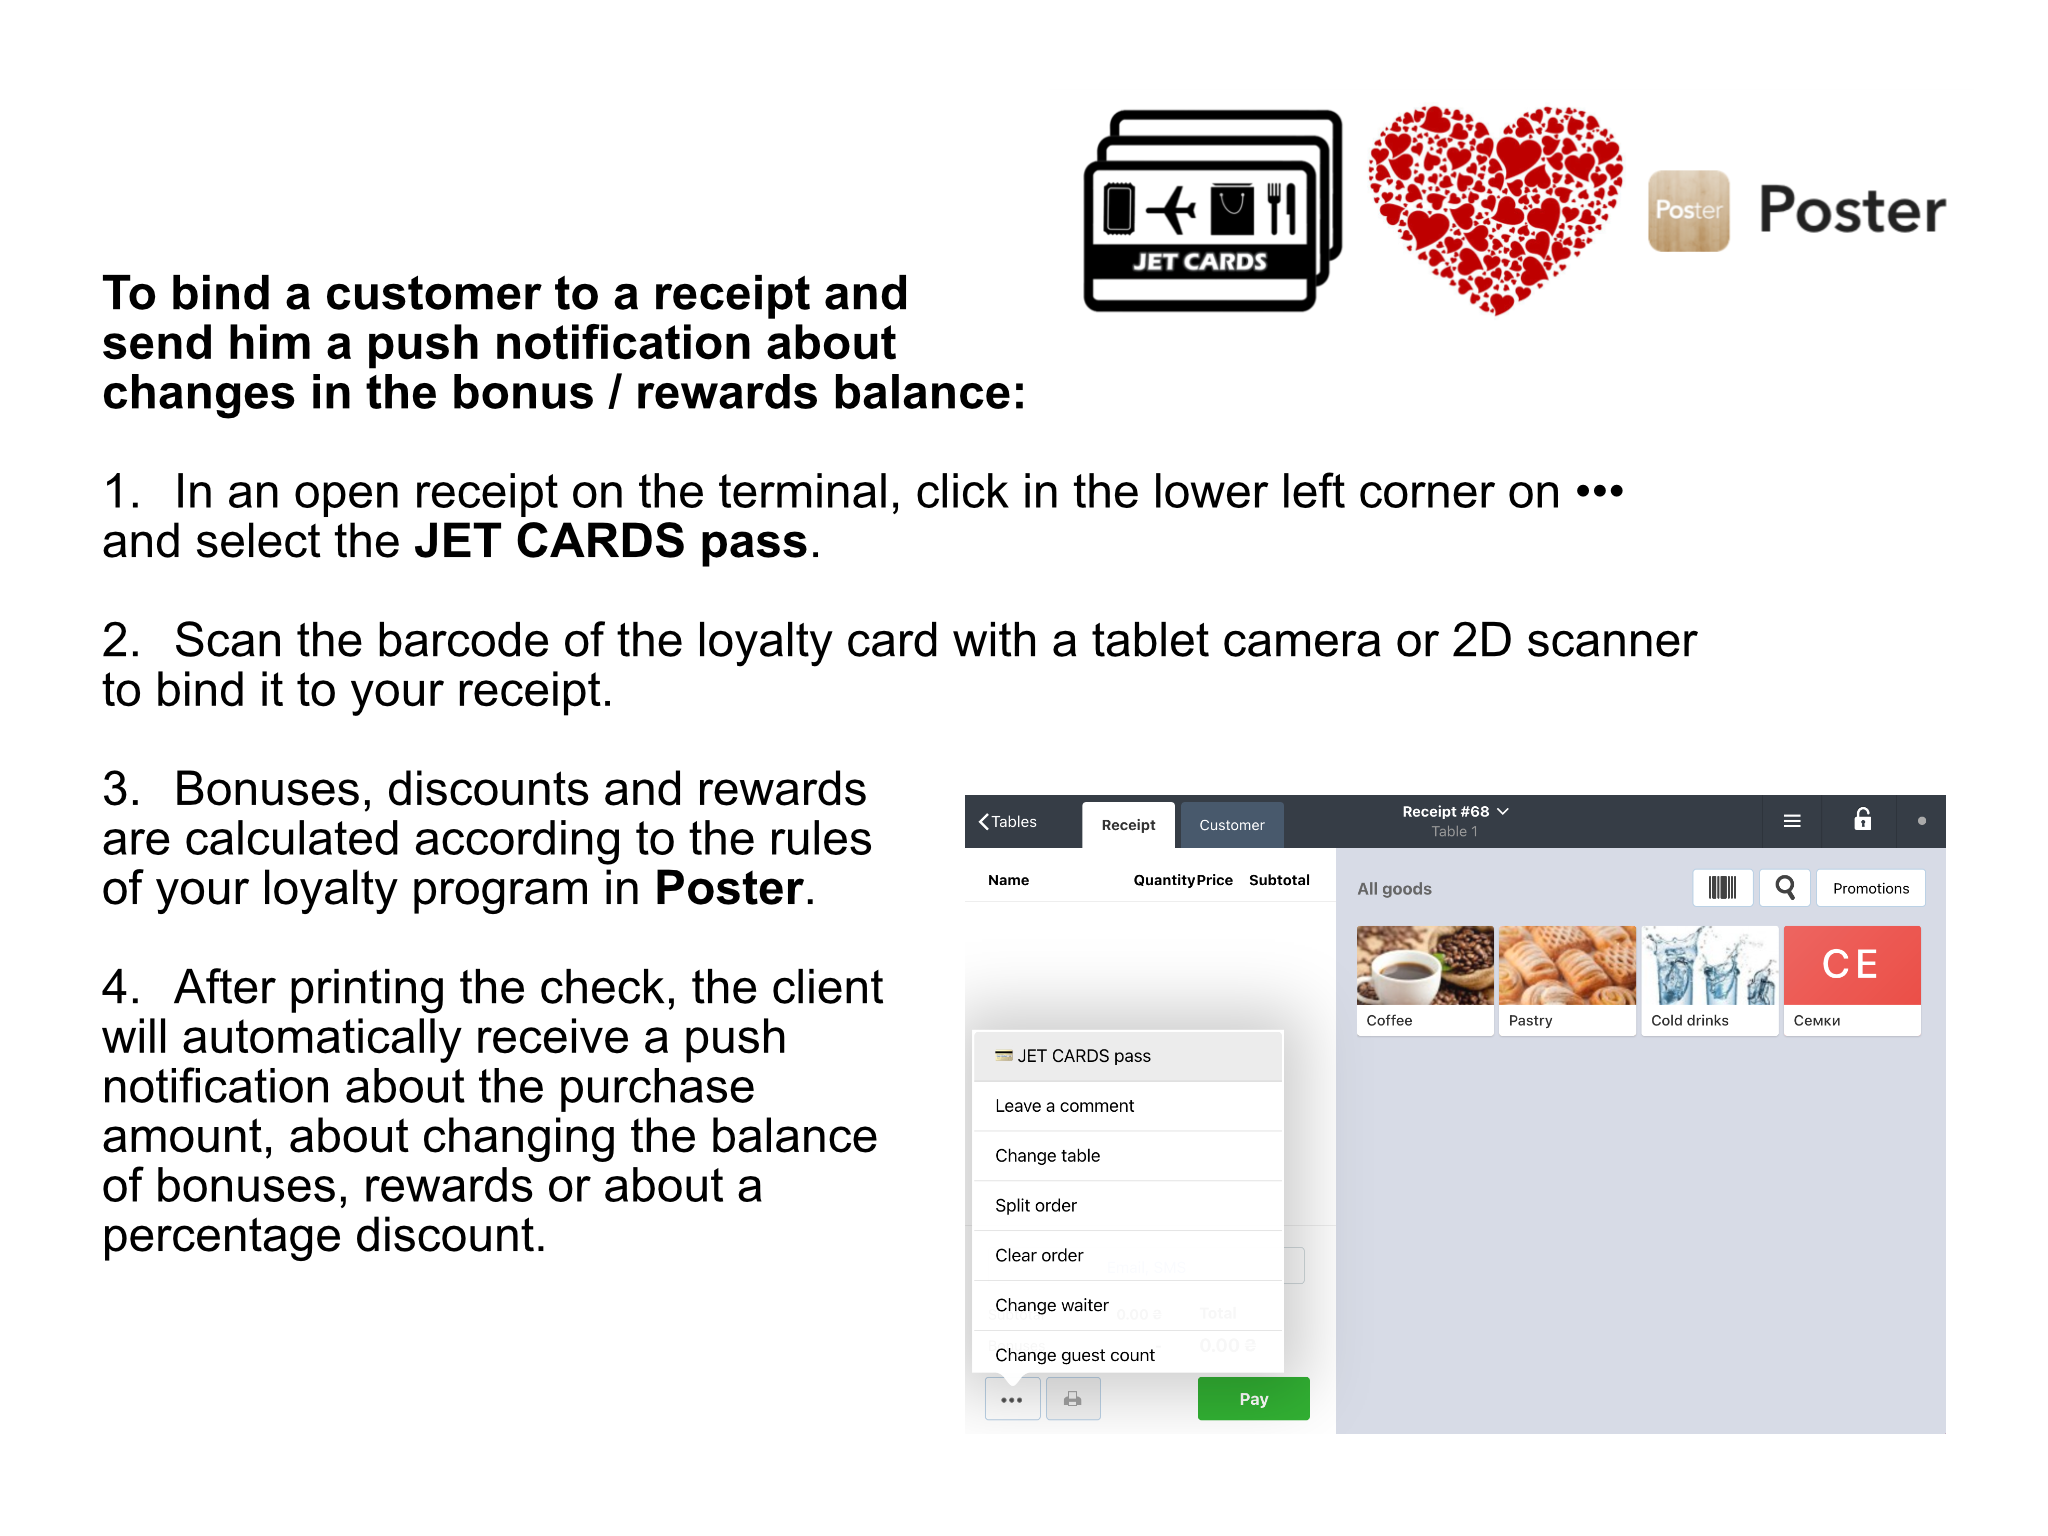 Loyalty cards and marketing tools